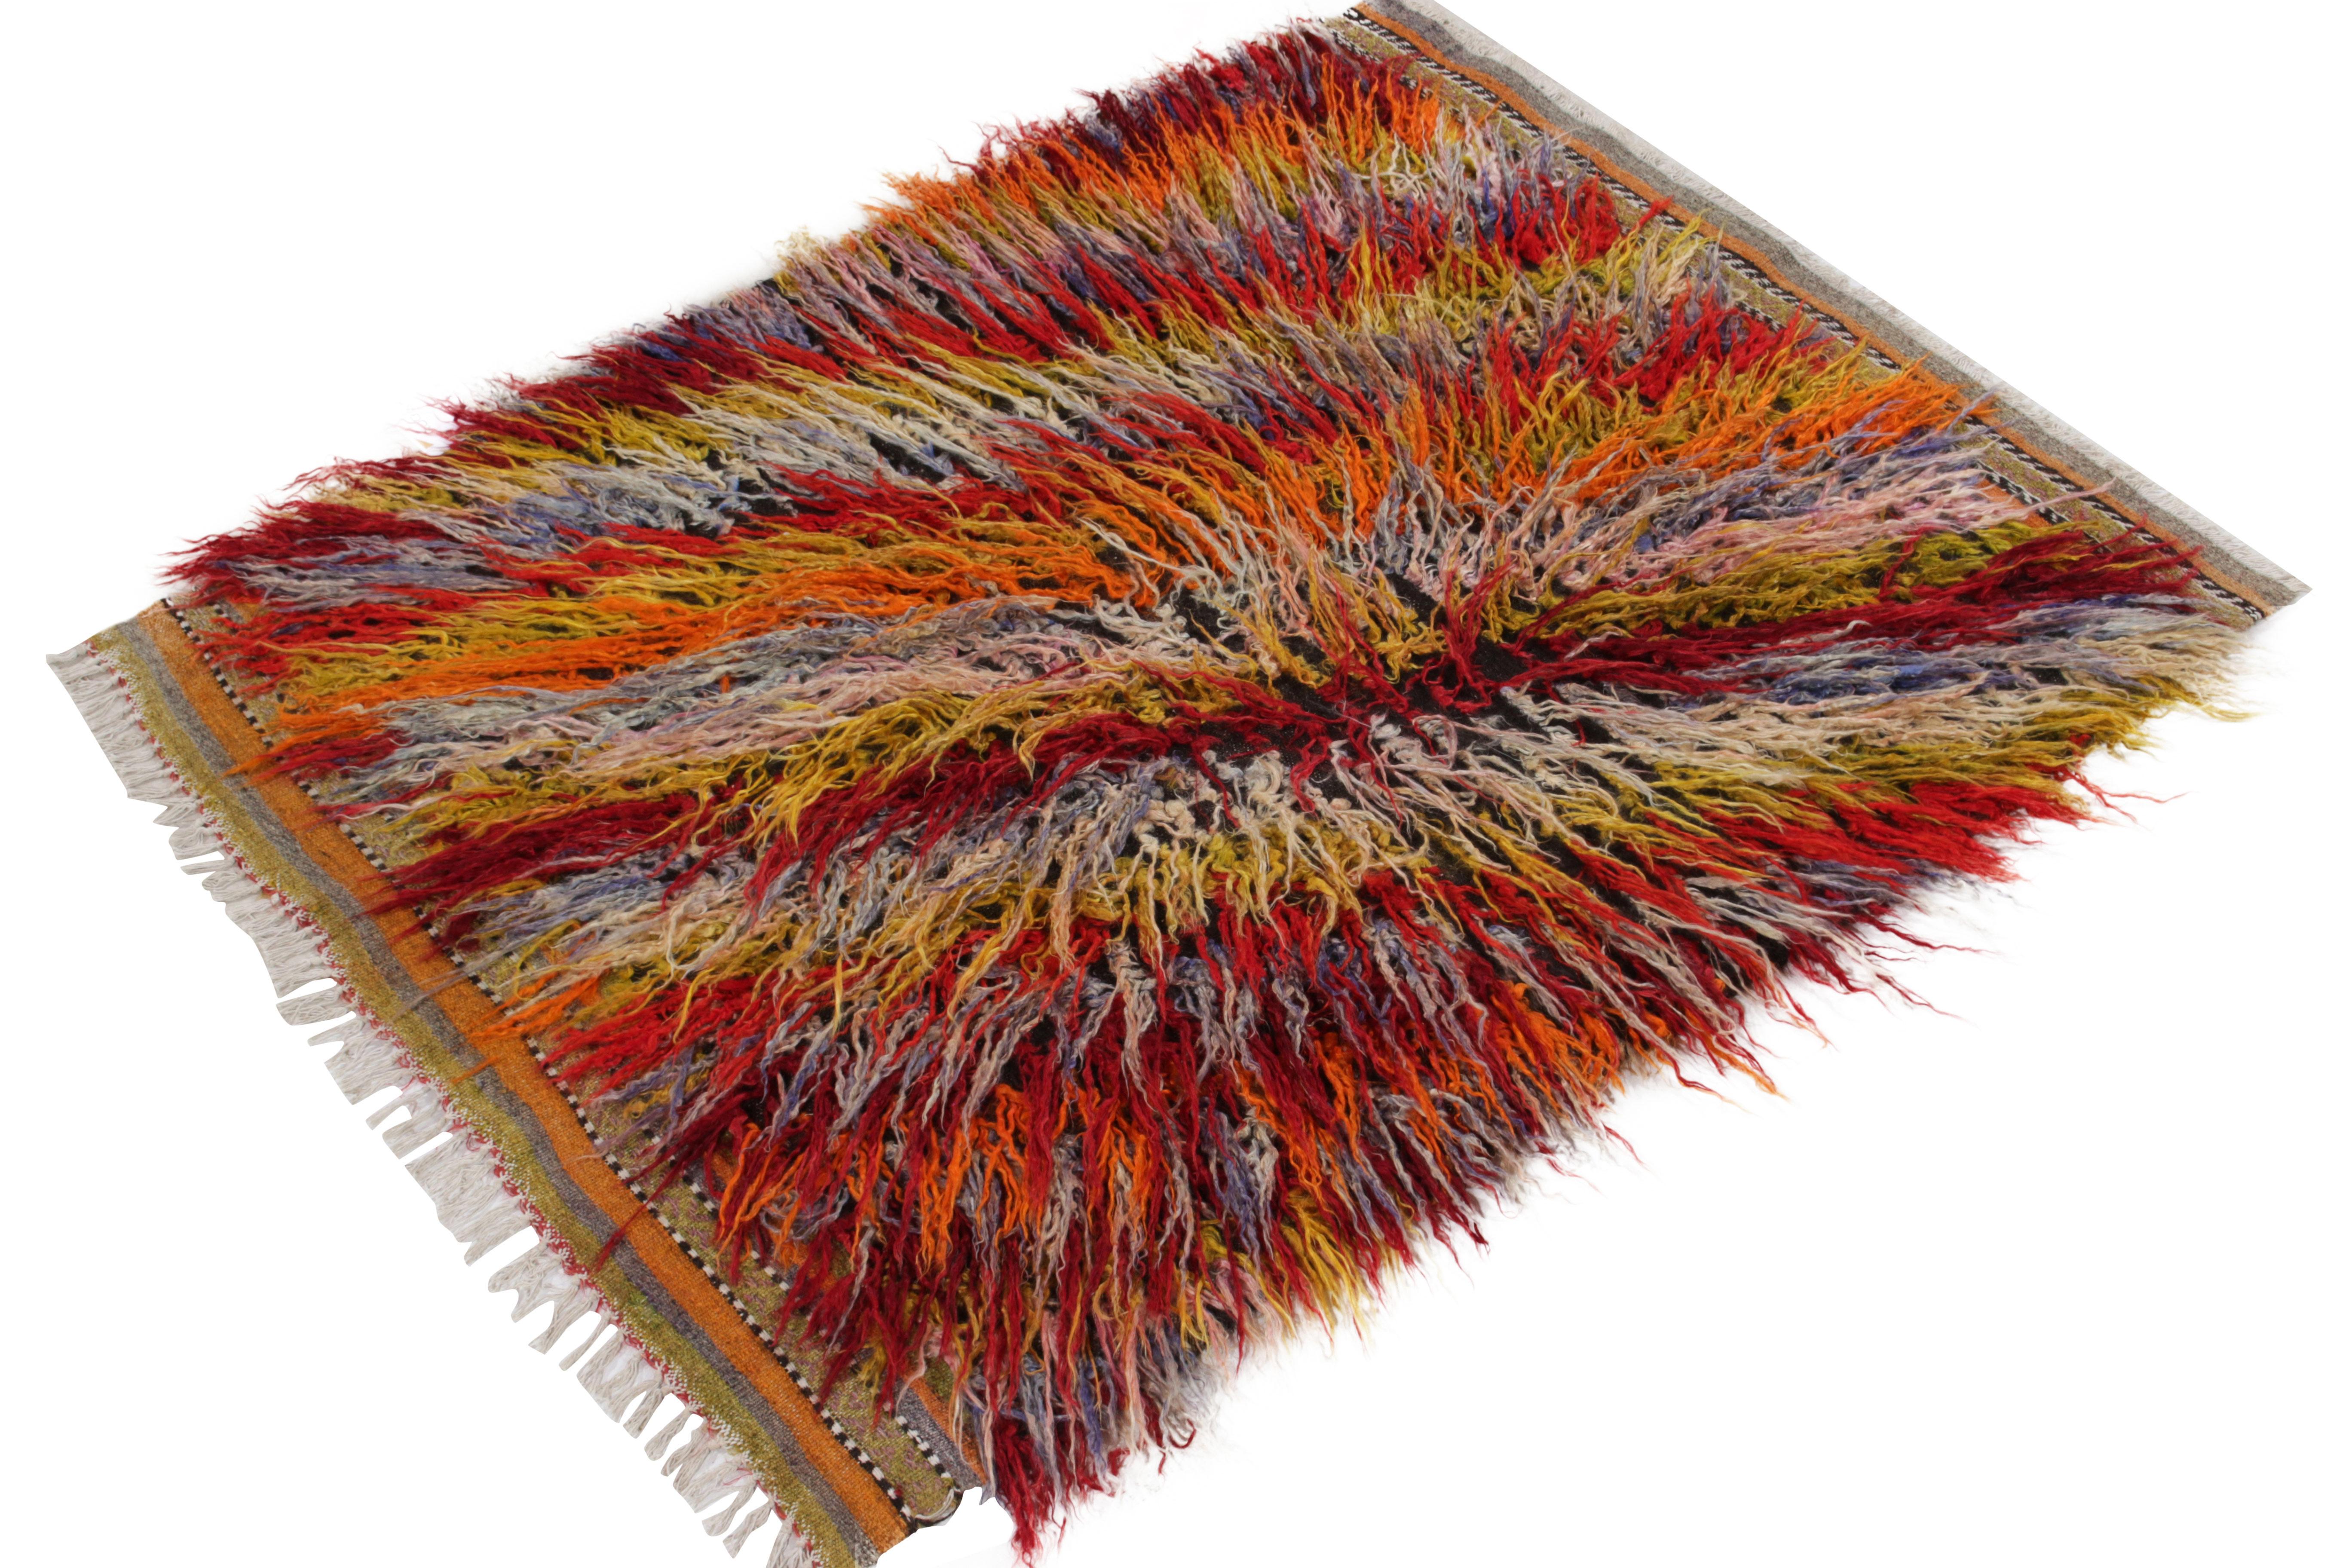 A 4x5 vintage Tulu rug from Turkey emanating exceptional mid-century aesthetics with high low texturability in a multicolor shag pile. Hand-knotted in fine wool, this rug further brings liveliness with a tribal design inspiration in red, yellow,